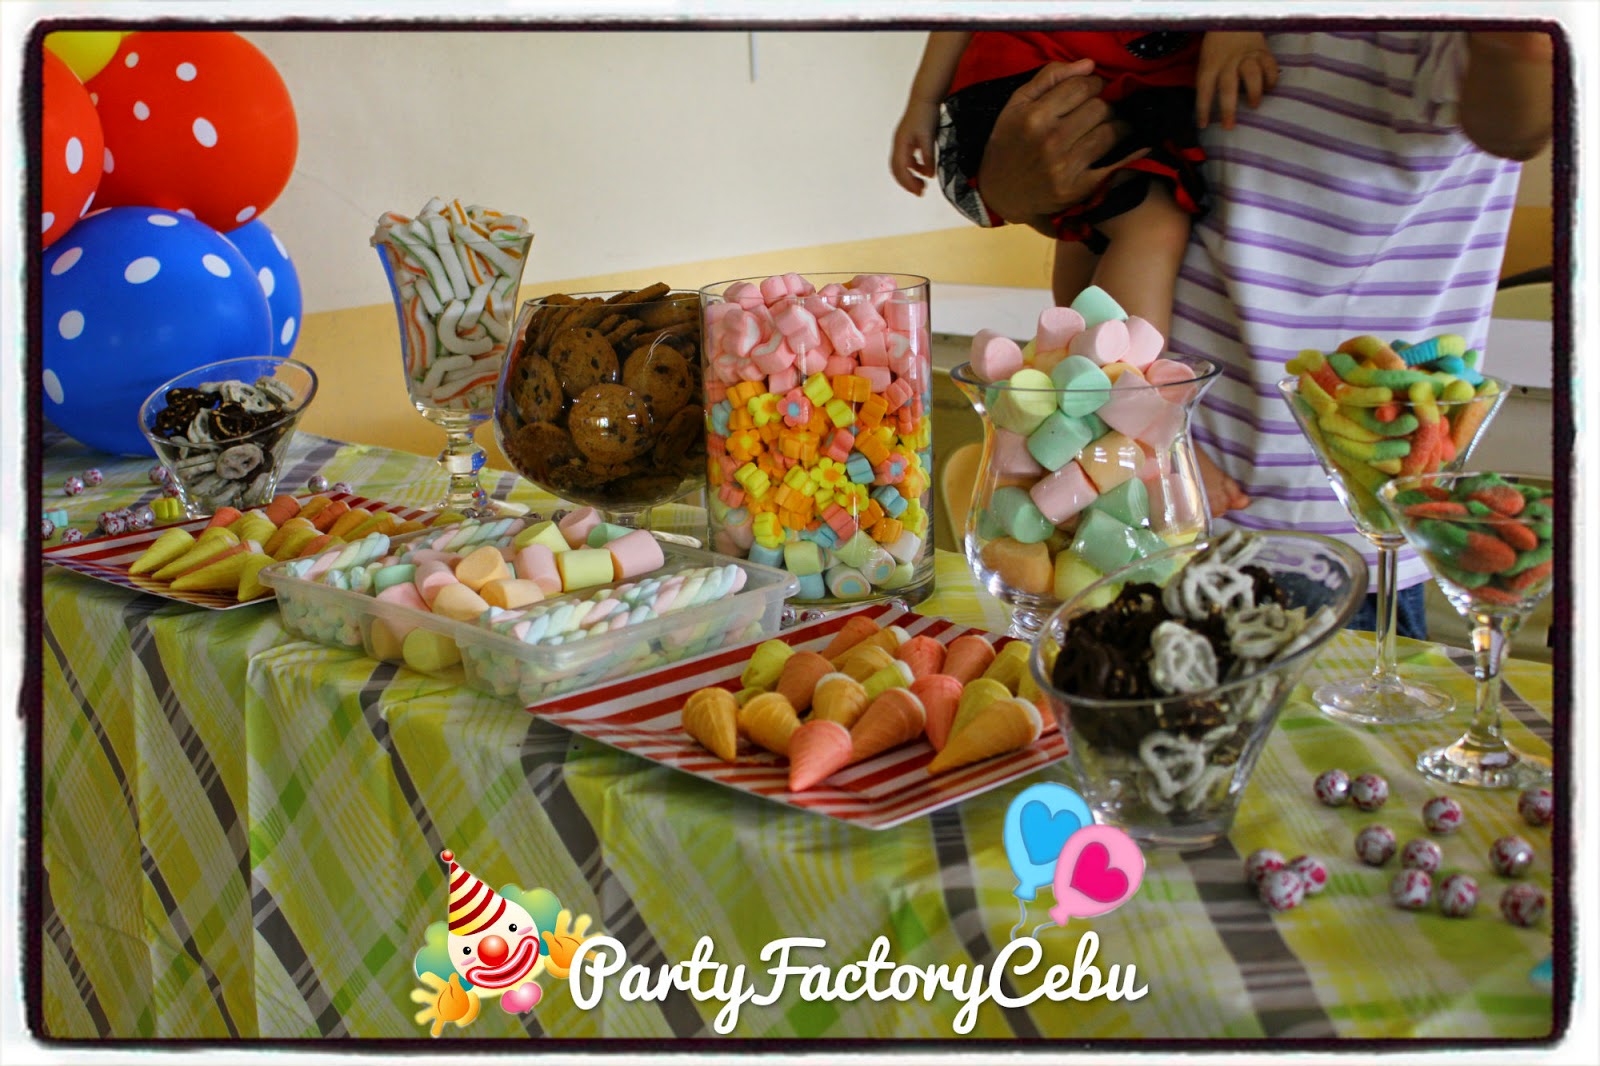 Welcome to PartyFactory Cebu: CANDY BUFFET & CHOCOLATE FOUNTAIN DISPLAYS